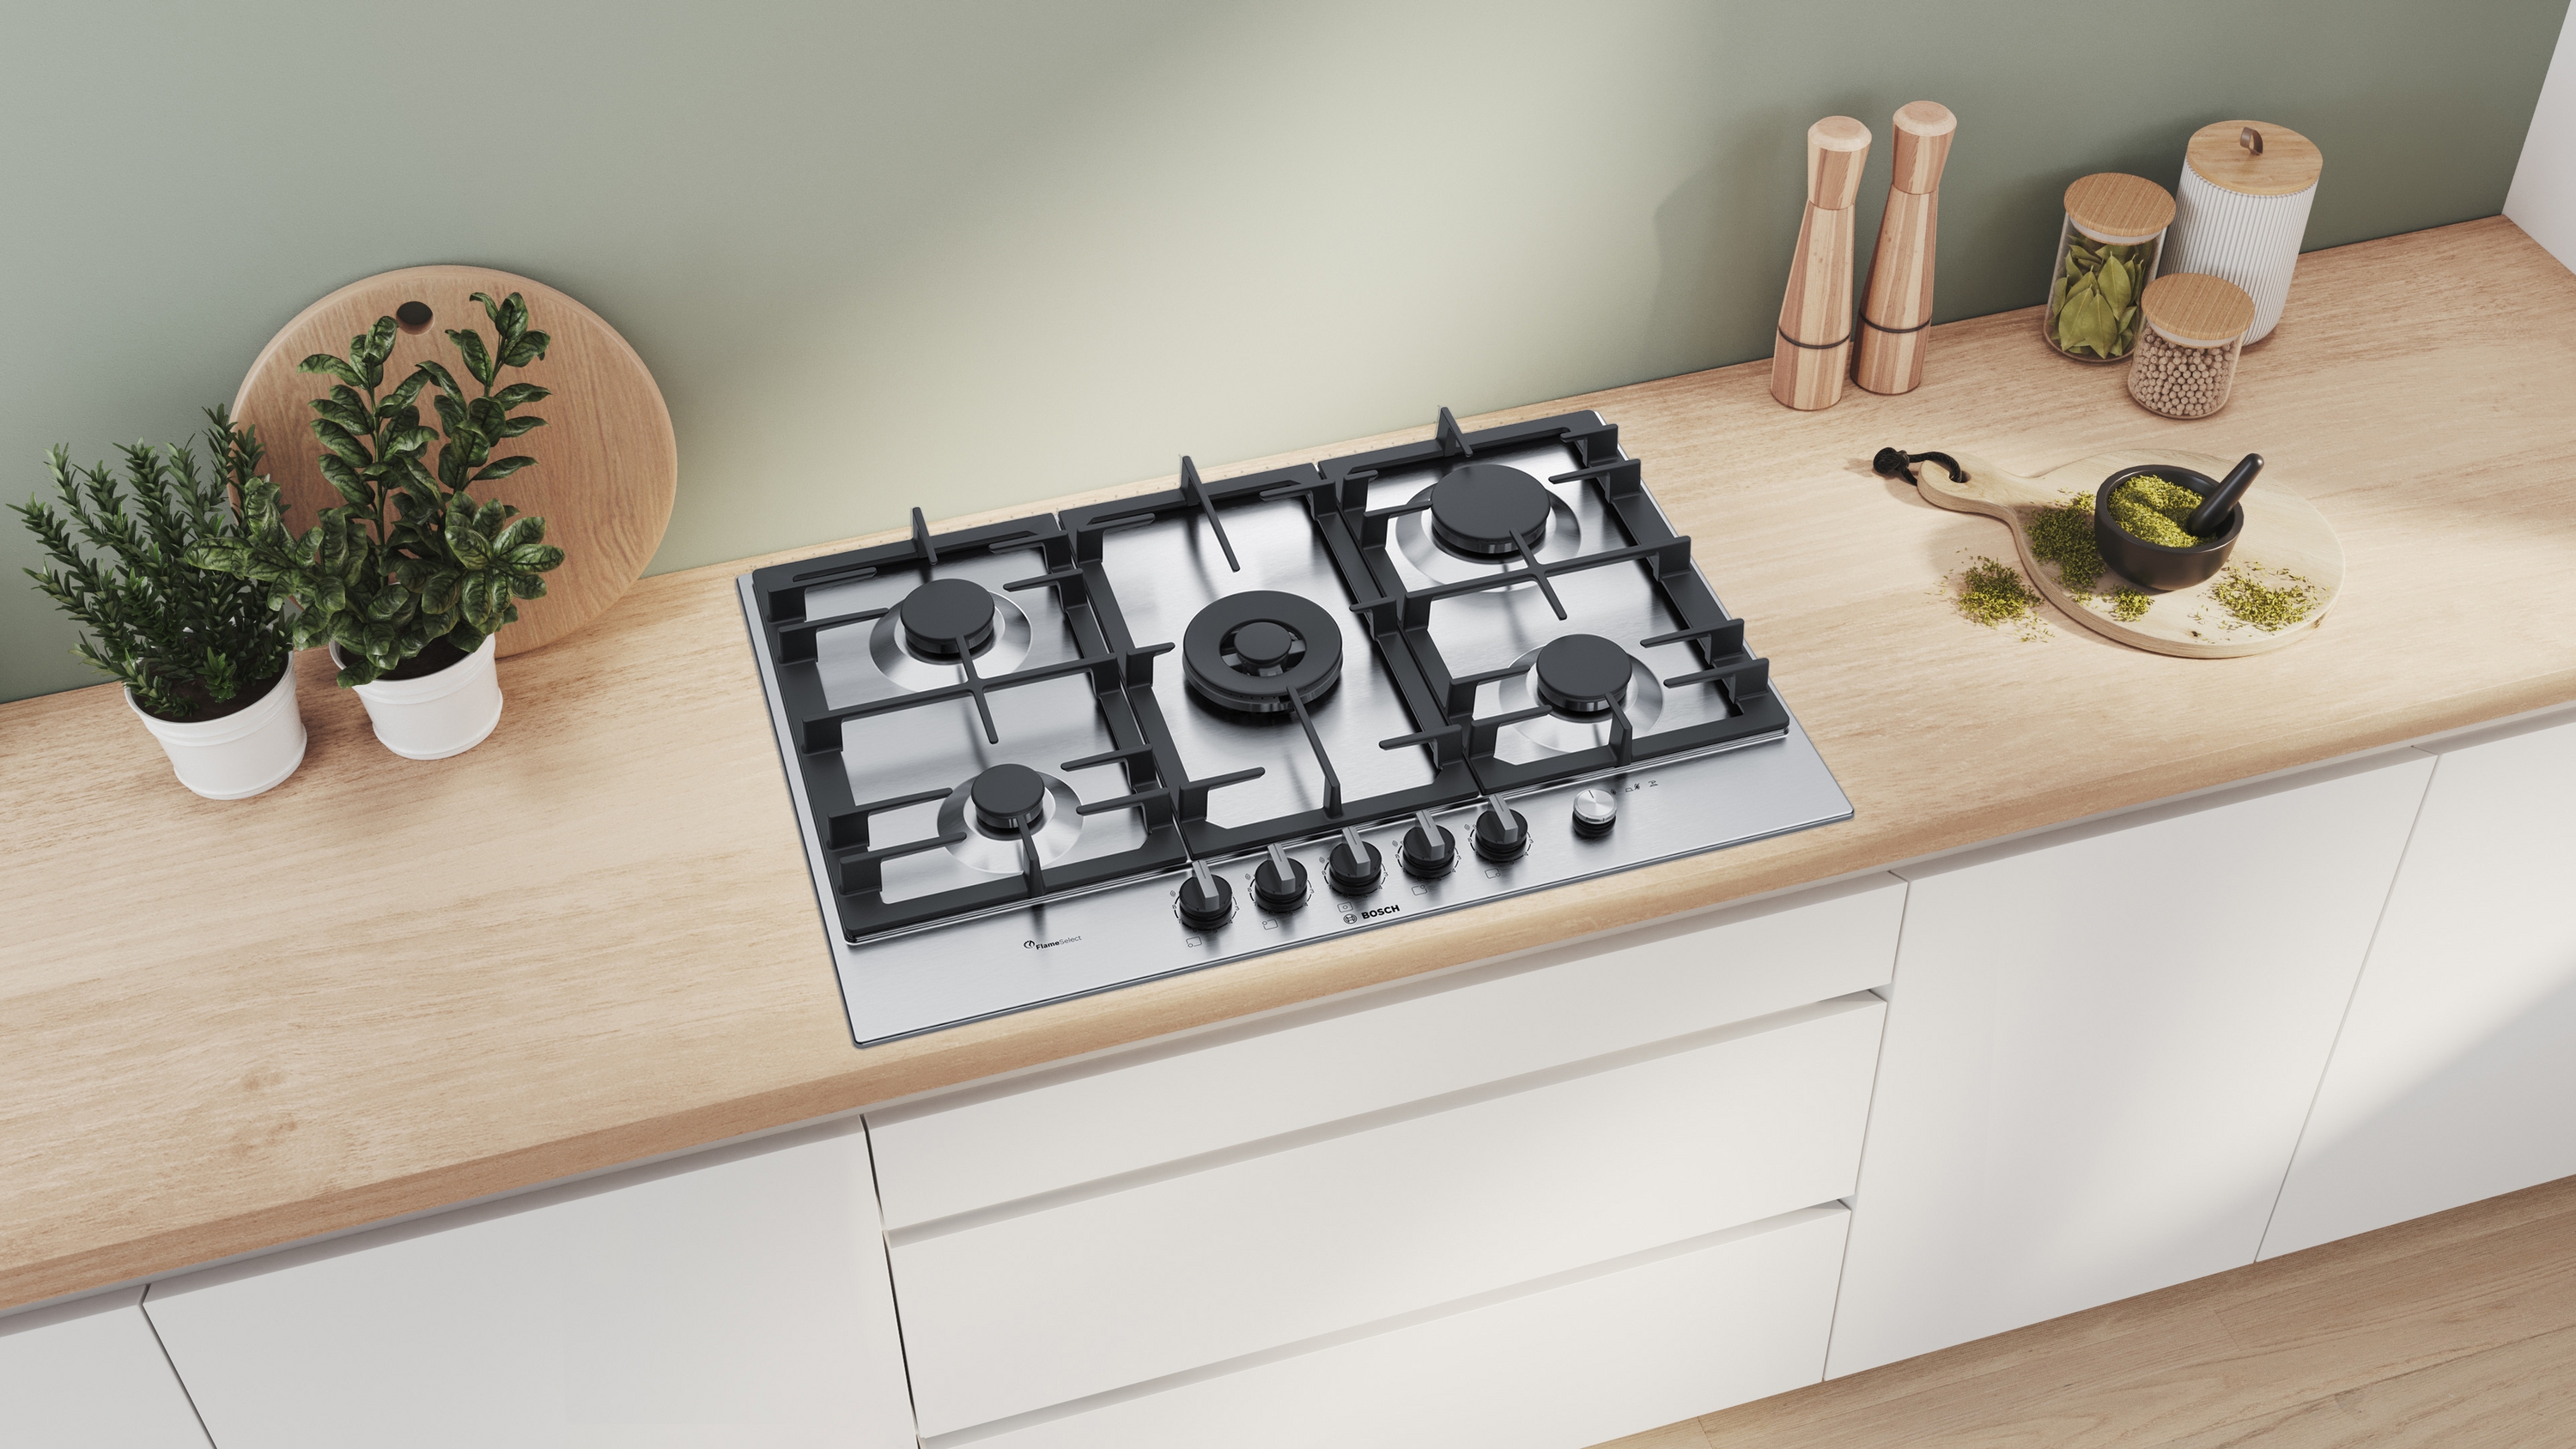 Series 6, Gas hob, 75 cm, Stainless steel, PCQ7A5M90